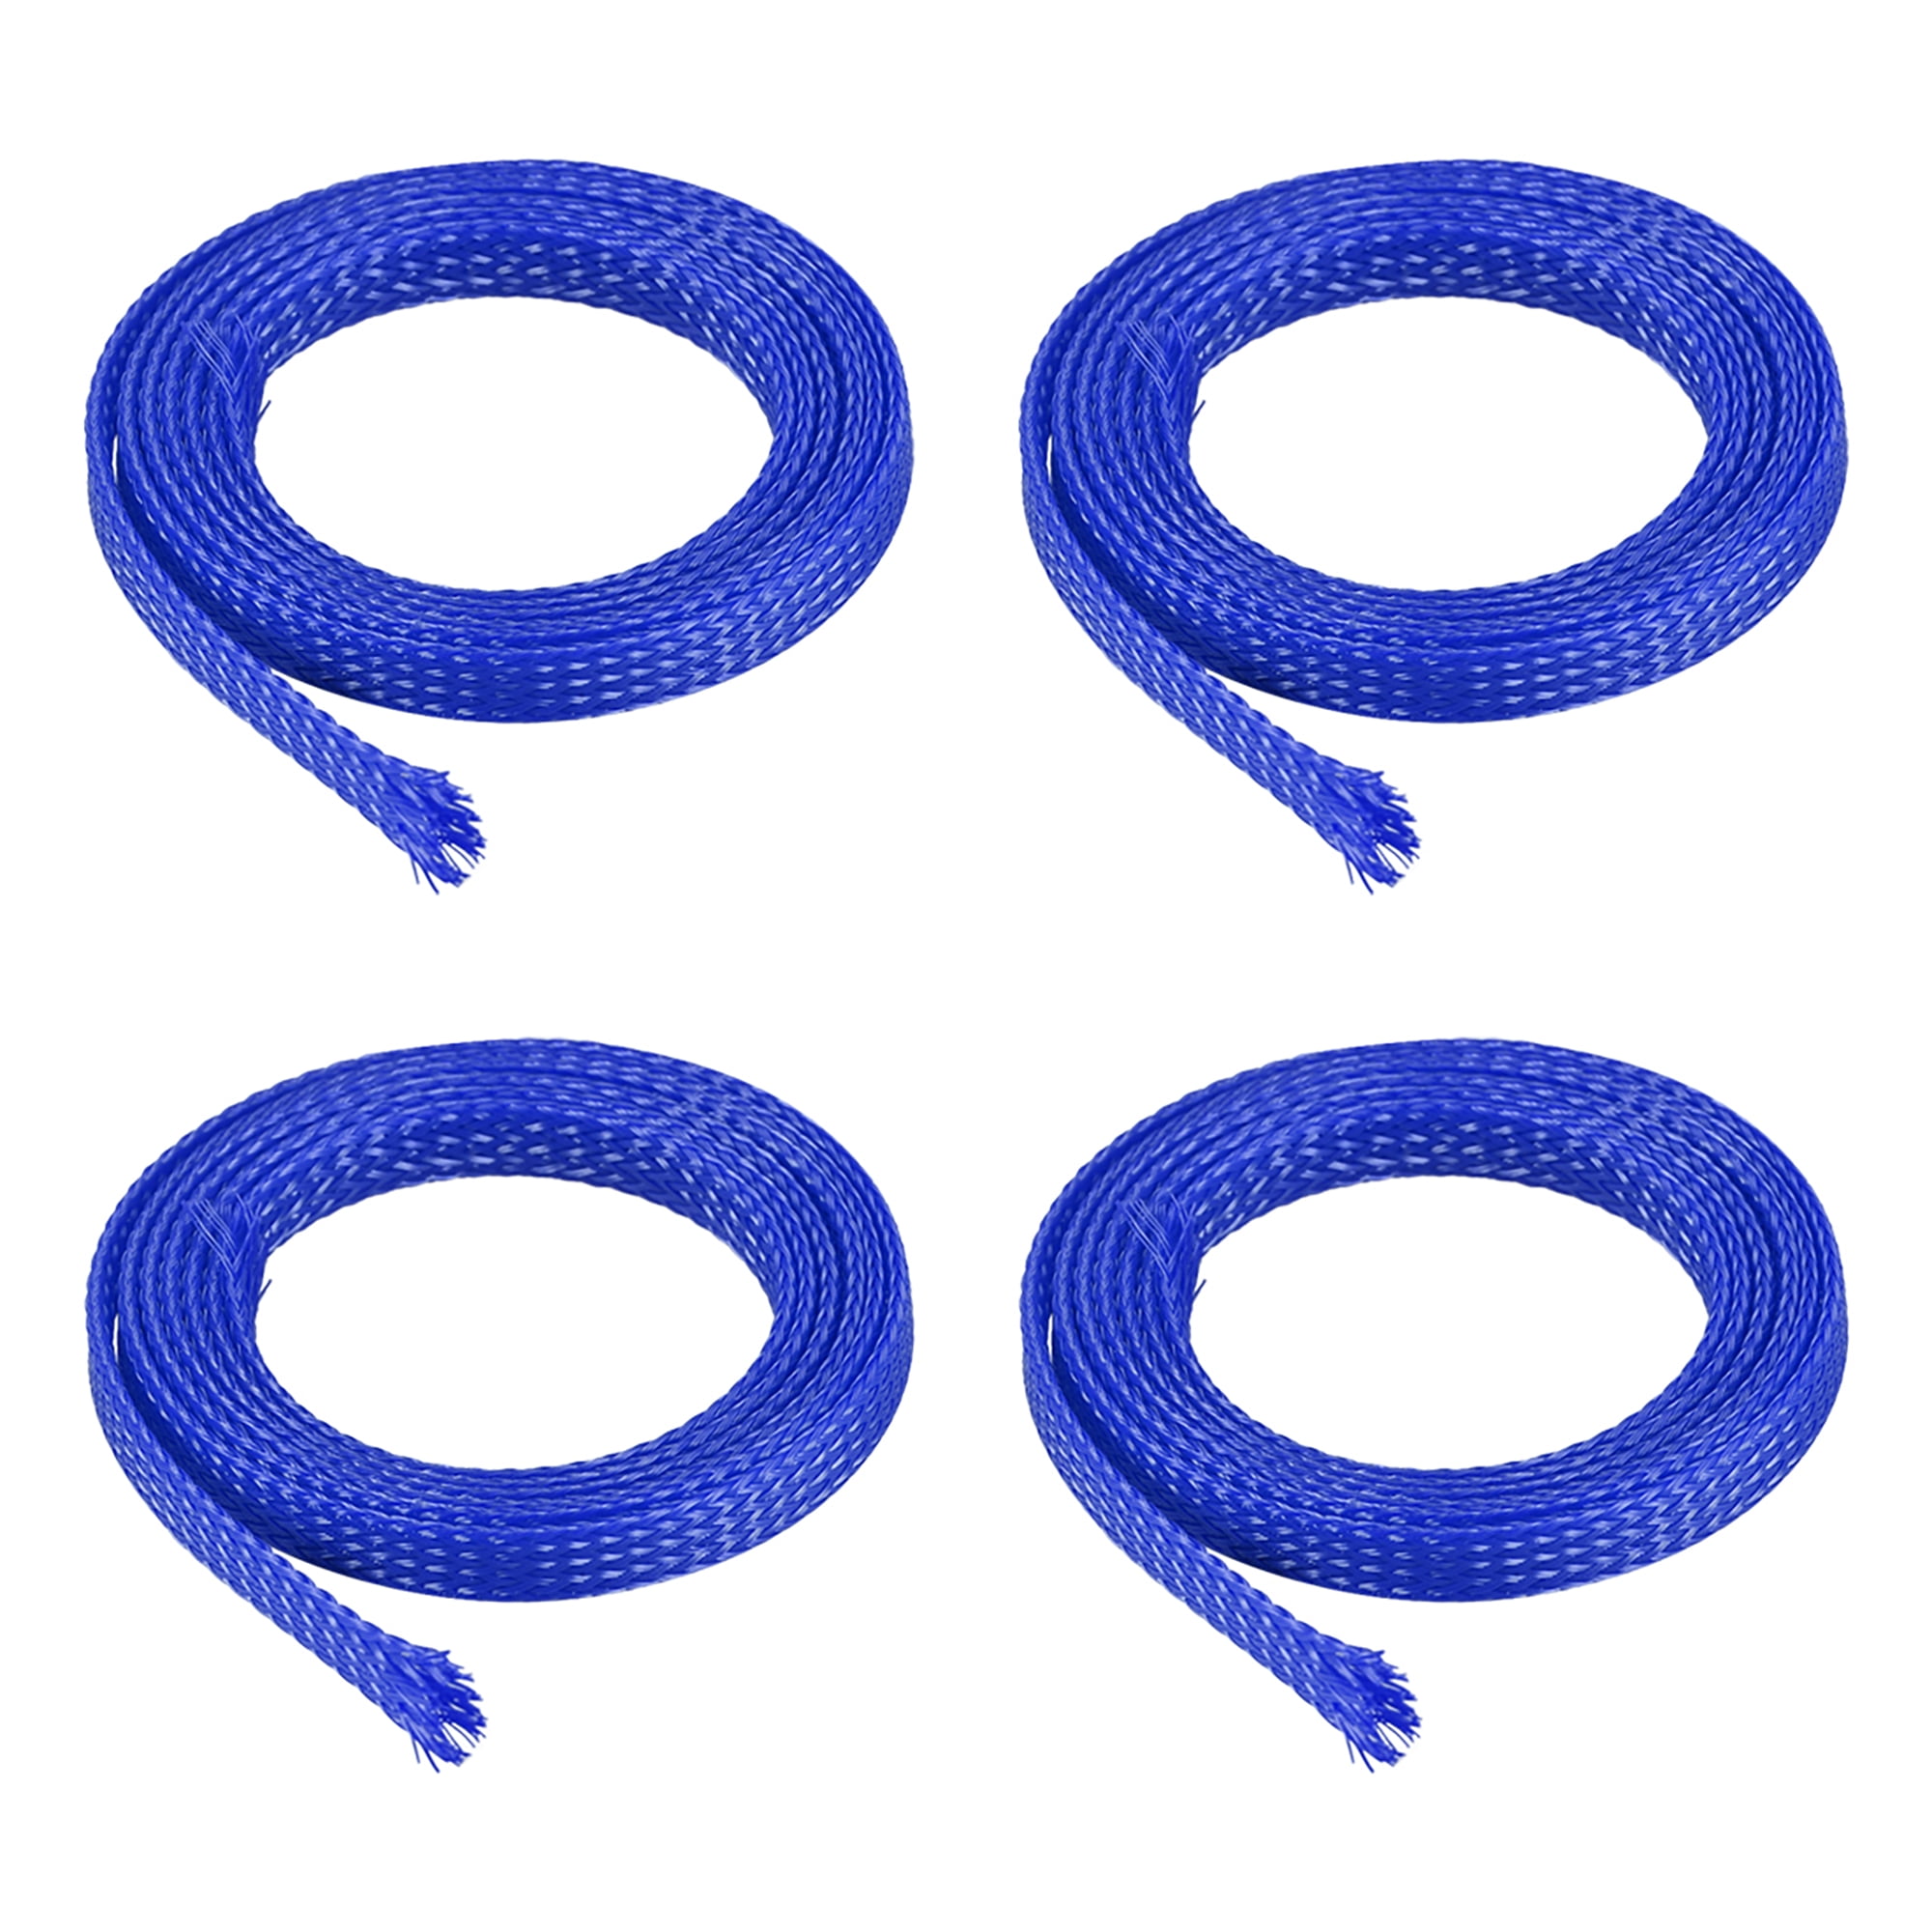 1 meters Royalblue High Densely 4mm Expanding Matte Braided Sleeving Cable